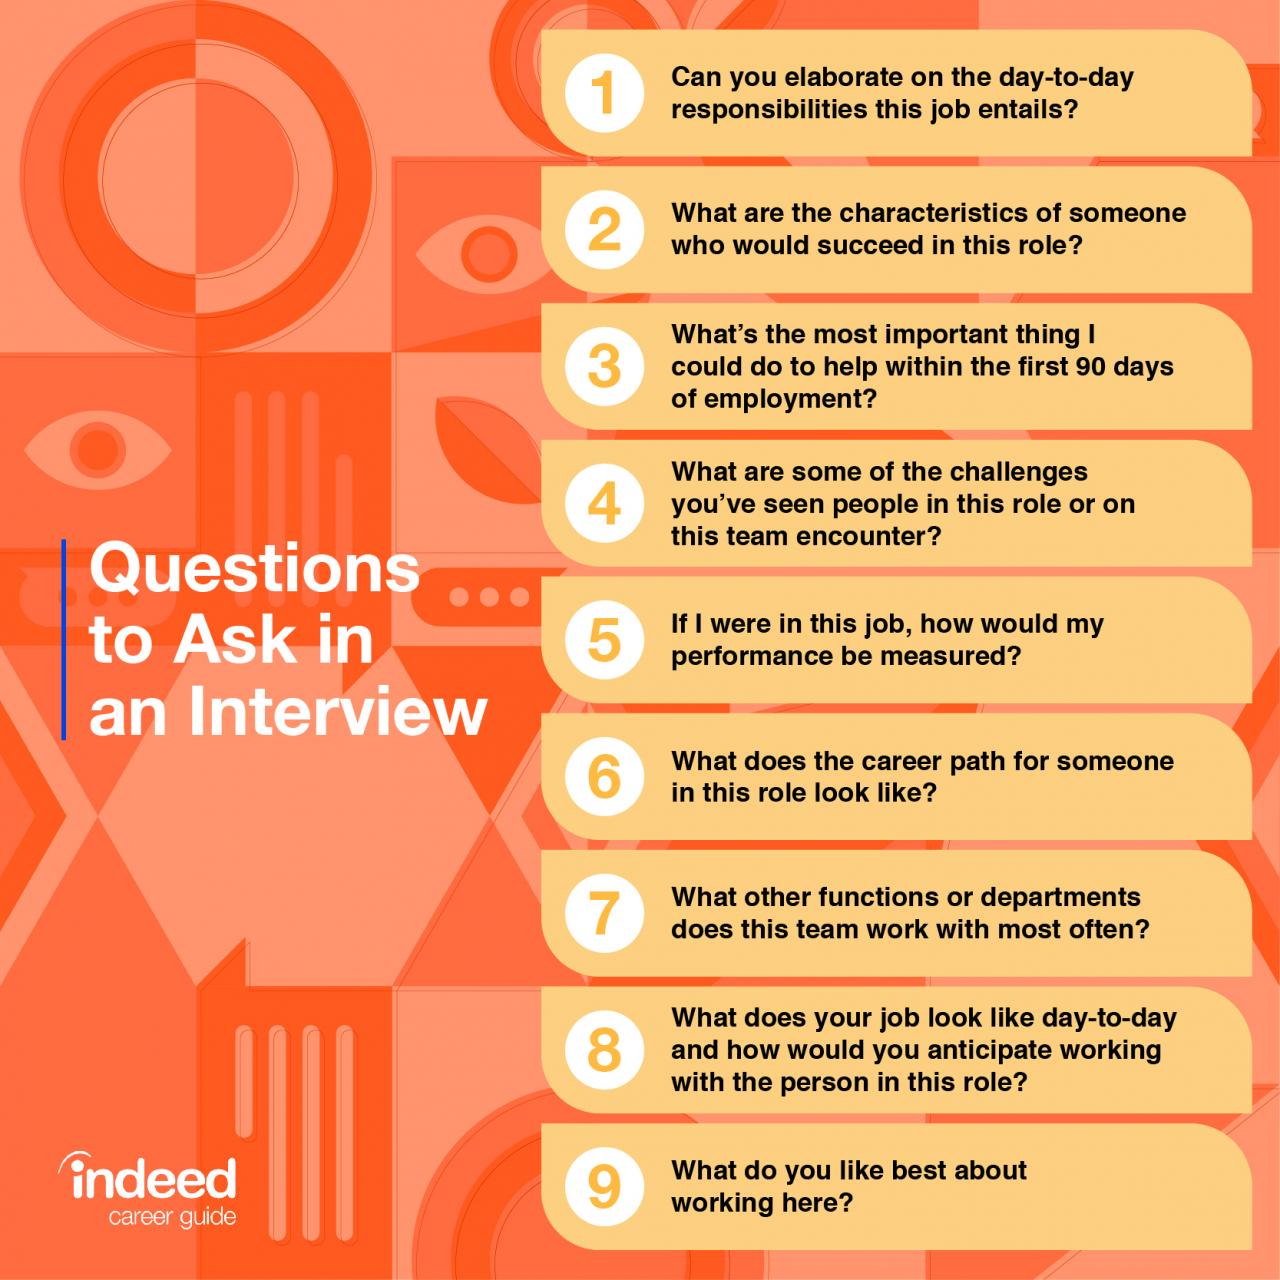 Great questions to ask for an interview